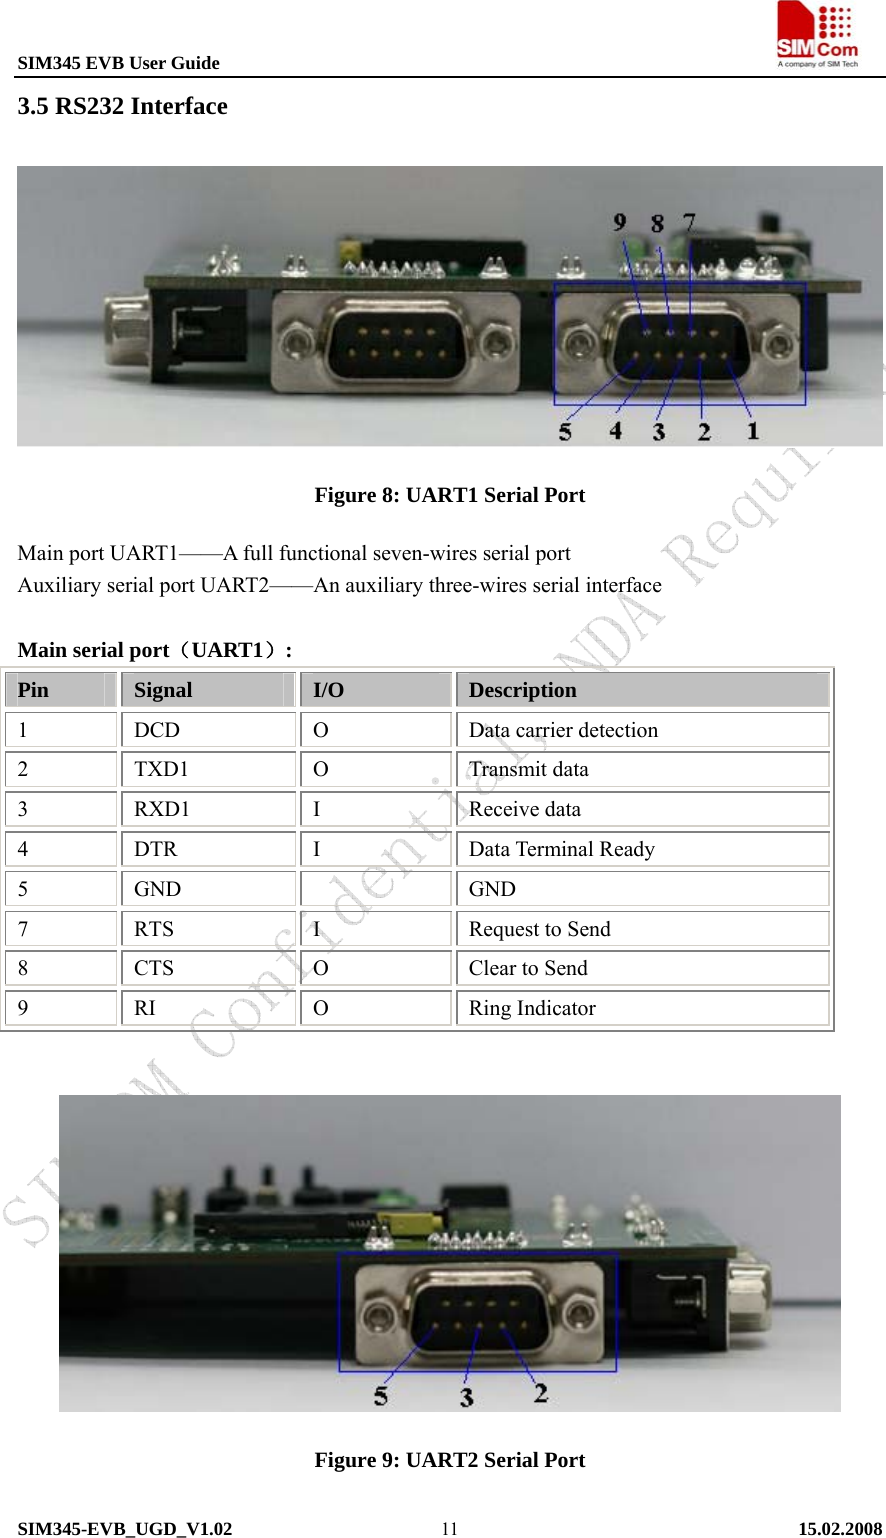 SIM345 EVB User Guide                                                             SIM345-EVB_UGD_V1.02   15.02.2008   113.5 RS232 Interface  Figure 8: UART1 Serial Port   Main port UART1——A full functional seven-wires serial port Auxiliary serial port UART2——An auxiliary three-wires serial interface  Main serial port（UART1）: Pin  Signal  I/O  Description 1 DCD  O Data carrier detection 2 TXD1  O Transmit data 3 RXD1  I Receive data 4 DTR  I Data Terminal Ready 5 GND    GND 7 RTS  I Request to Send 8 CTS  O Clear to Send 9 RI  O Ring Indicator   Figure 9: UART2 Serial Port   